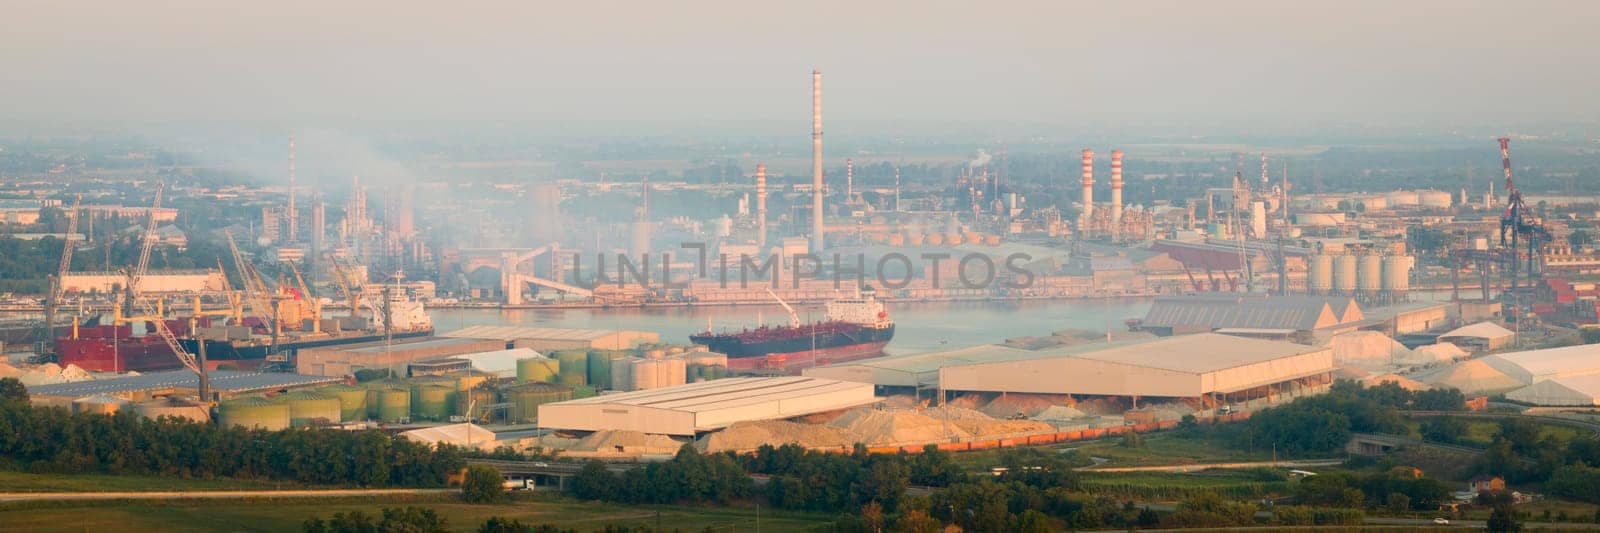 Drone view of industrial and port area of Ravenna at morning by Robertobinetti70